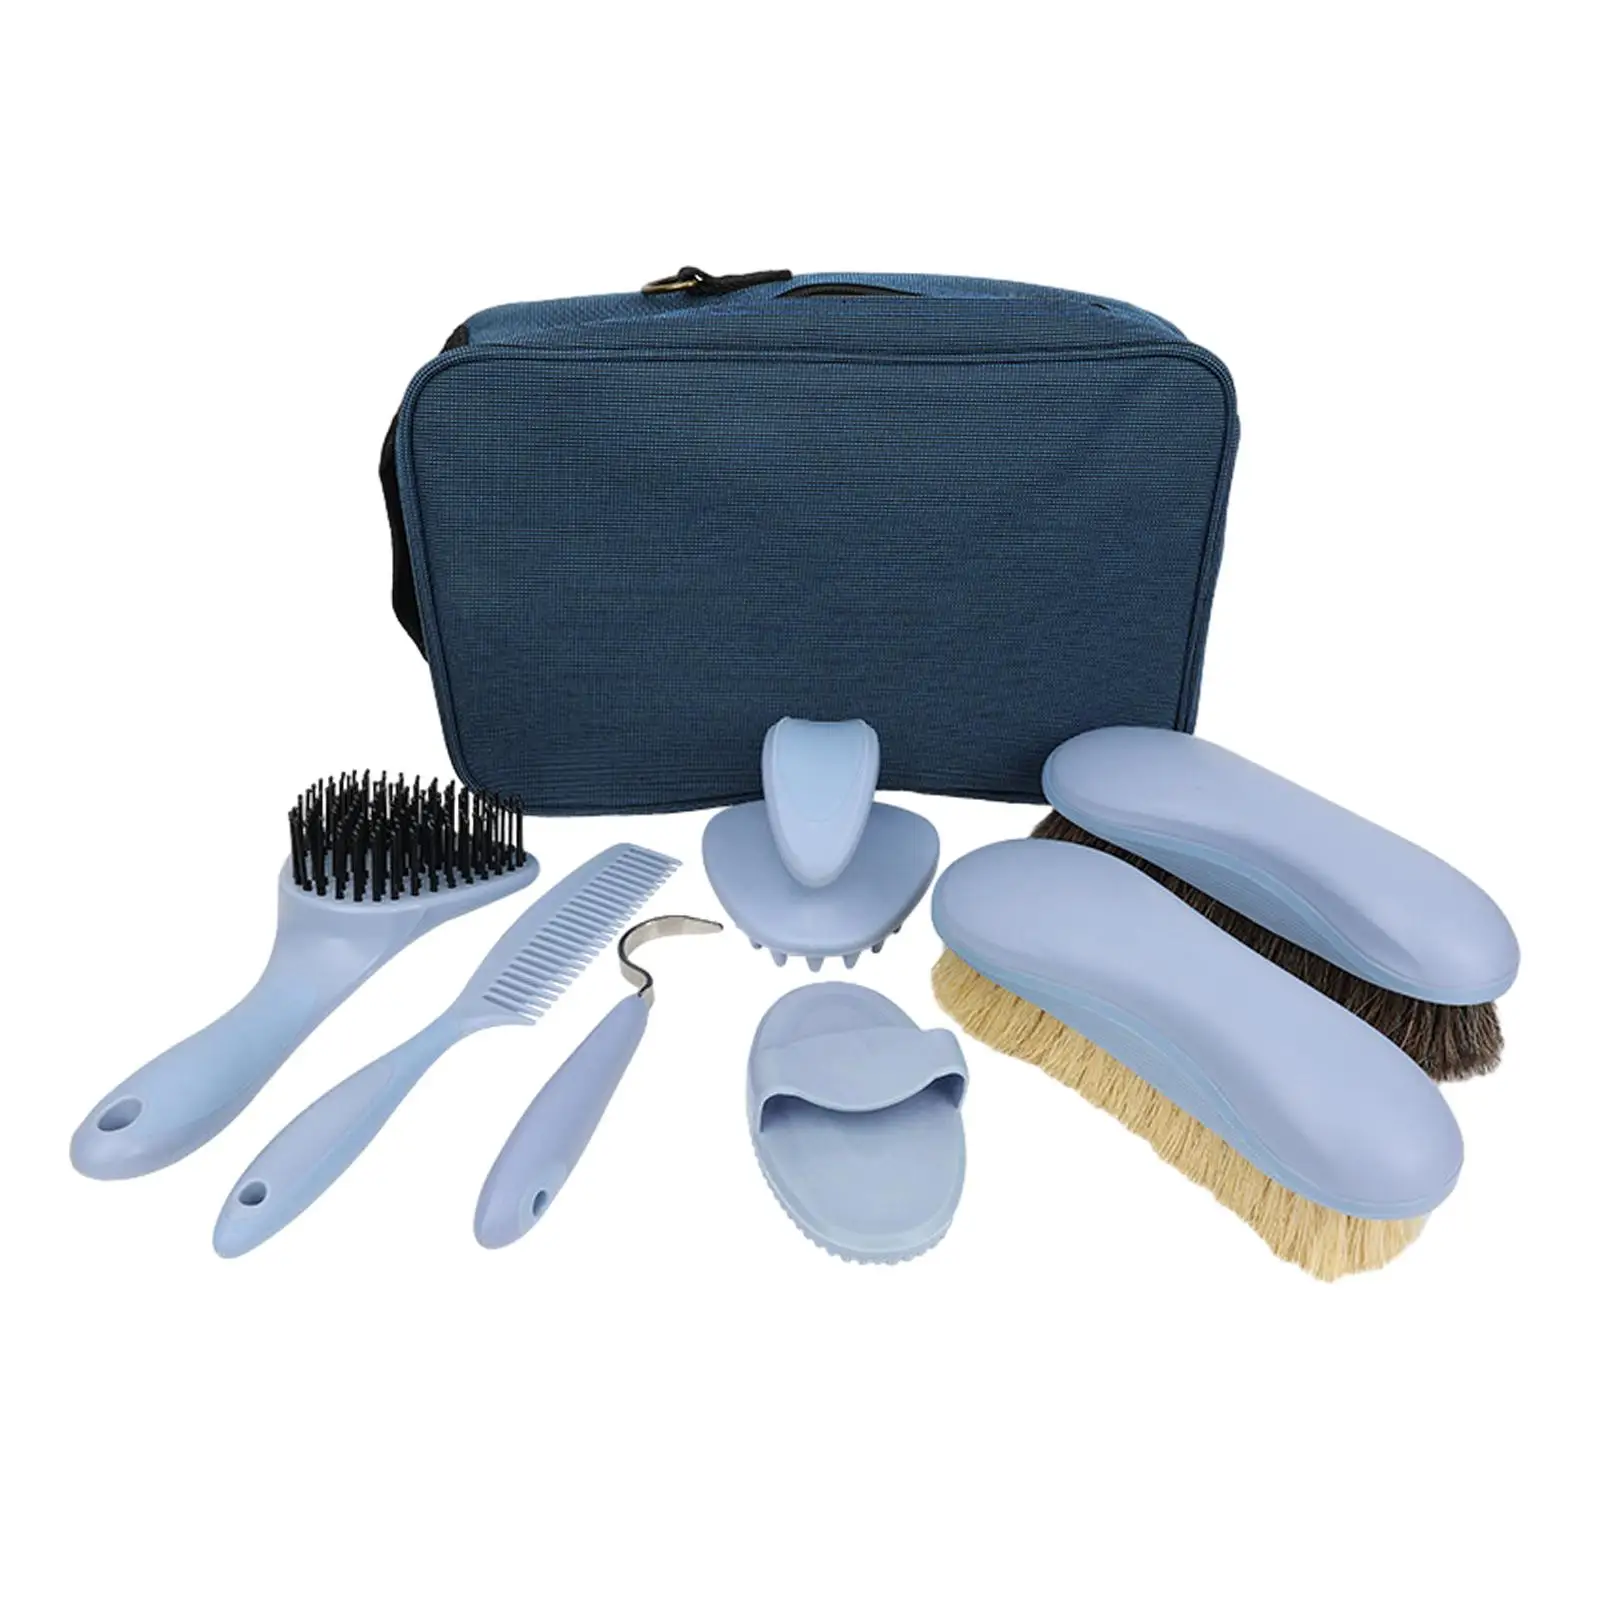 8pcs-horse-grooming-kit-equestrian-maintenance-set-for-horse-riders-adults